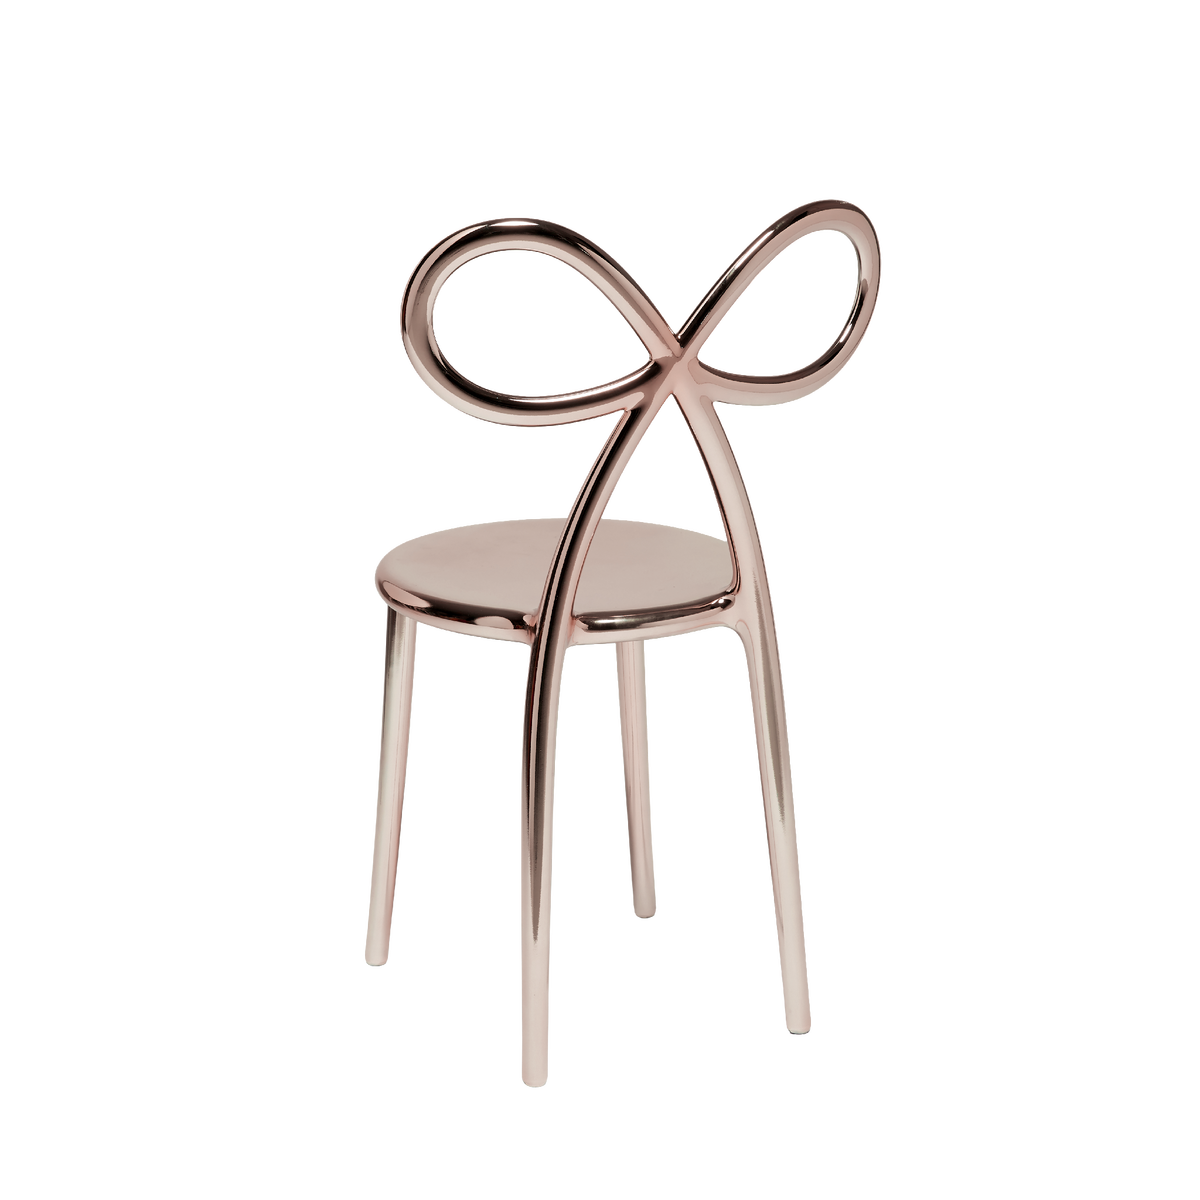 The Ribbon chair has become a symbol of strong female energy, which takes on identity, expressing all kinds of emotions. Grateful and amazing in its form becomes a symbol of a gift